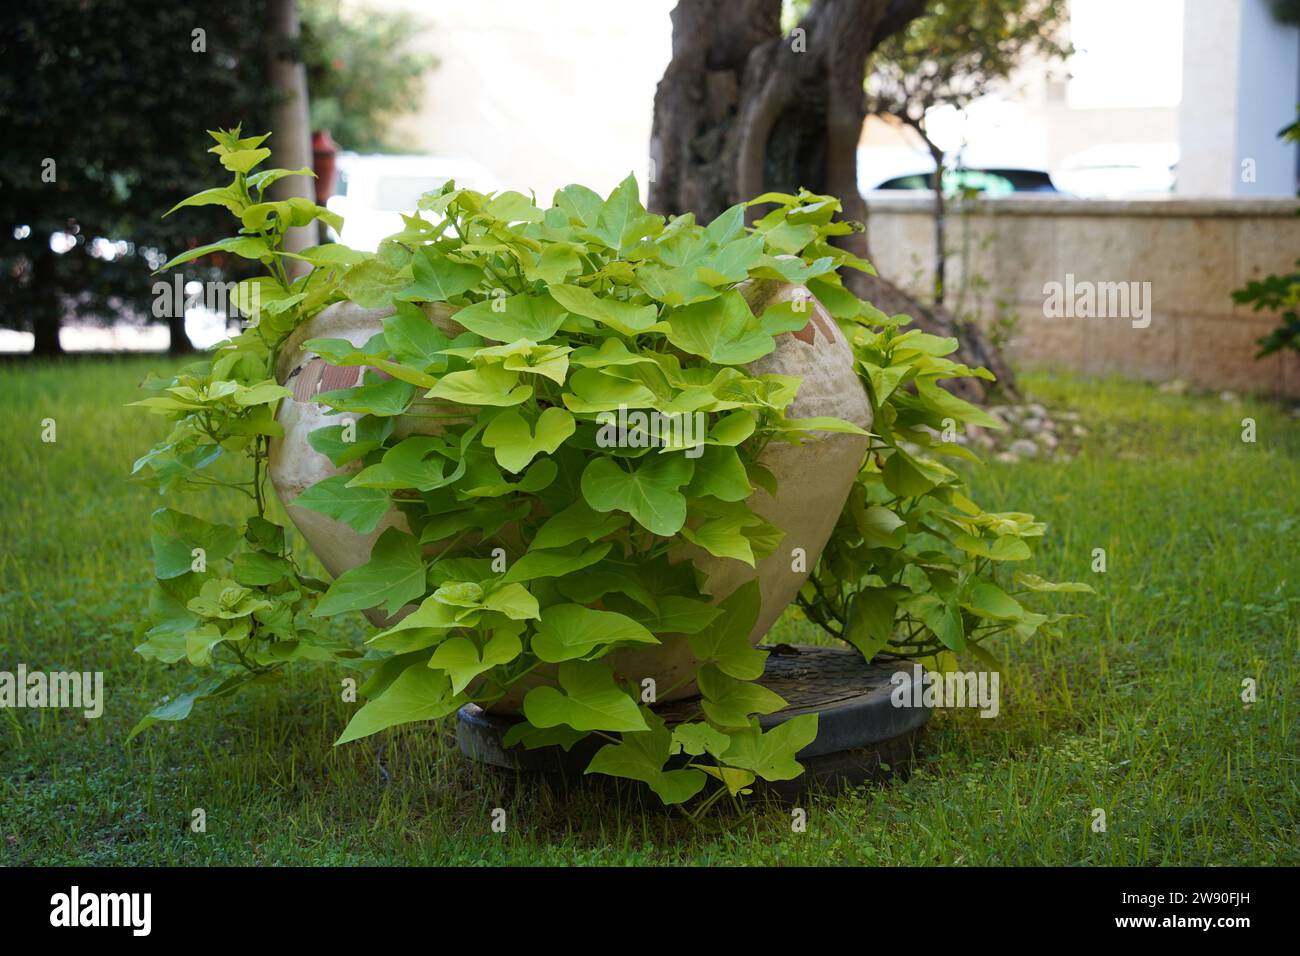 Sweet potato vine (Ipomoea batatas), is an ornamental warm-season annual grown for its attractive leaves and vining habit. Stock Photo